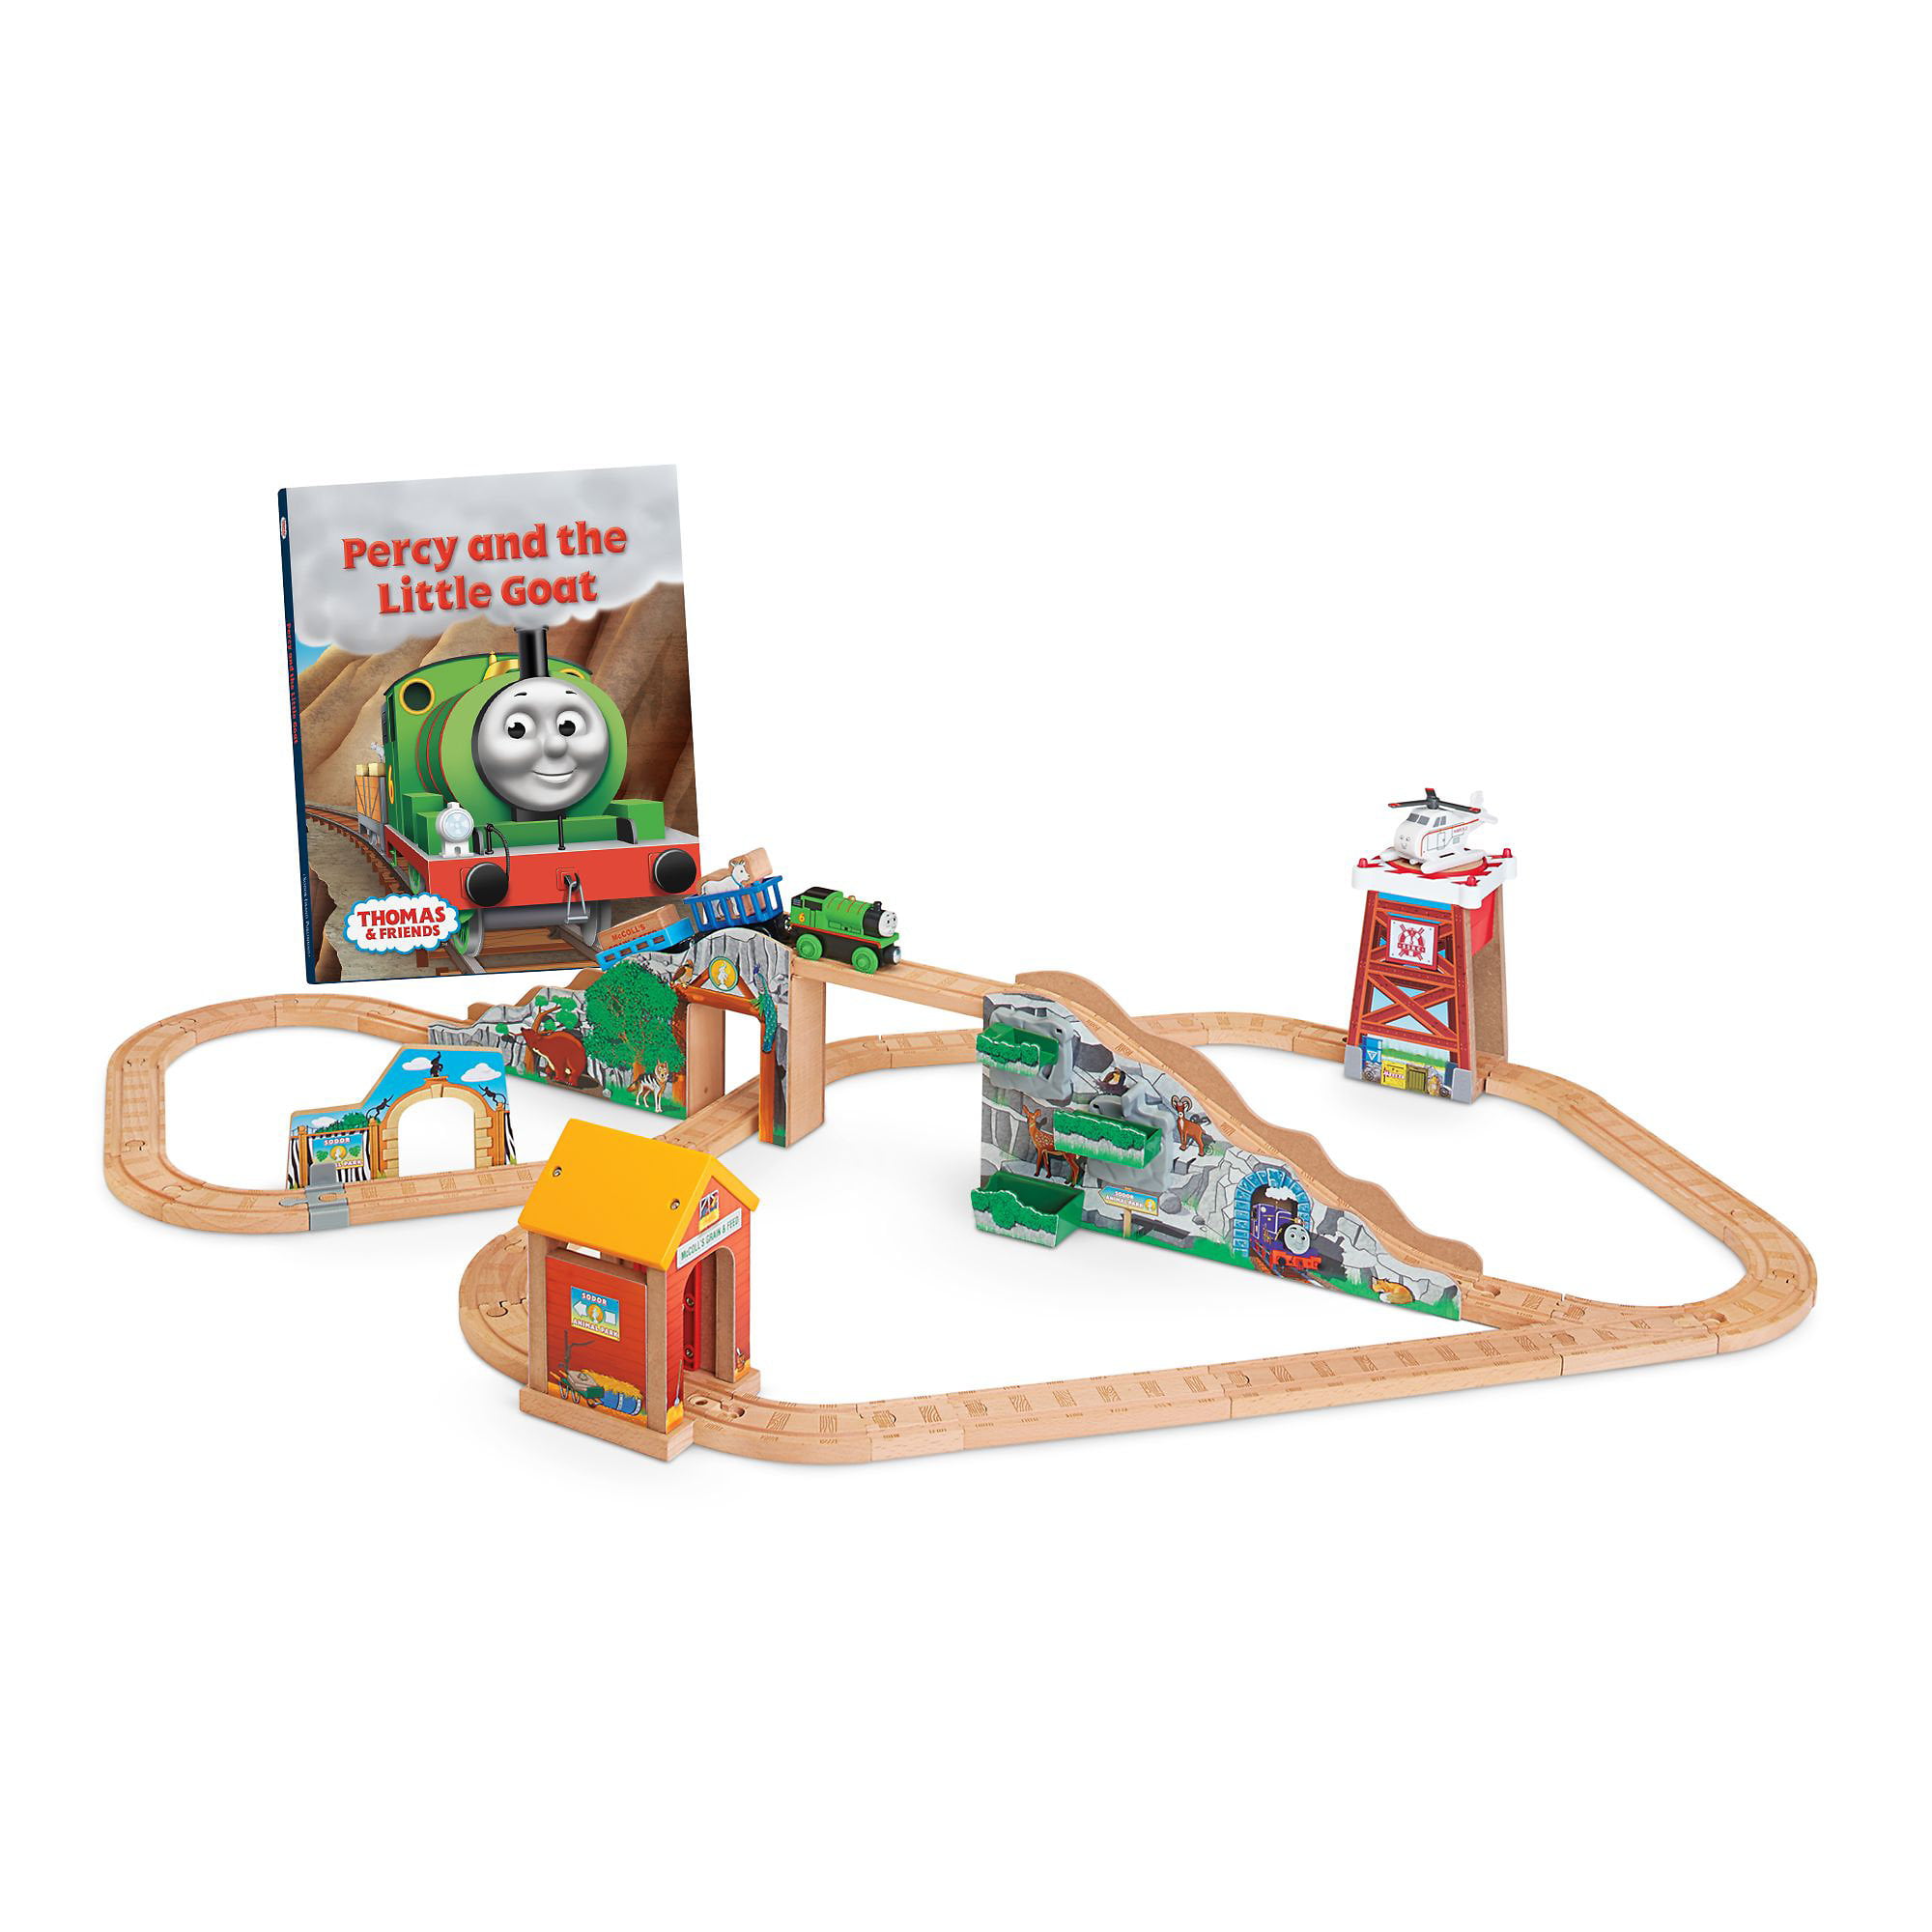 Fisher-Price Thomas & Friends Wooden Railway Percy & The Little Goat Set Toy 